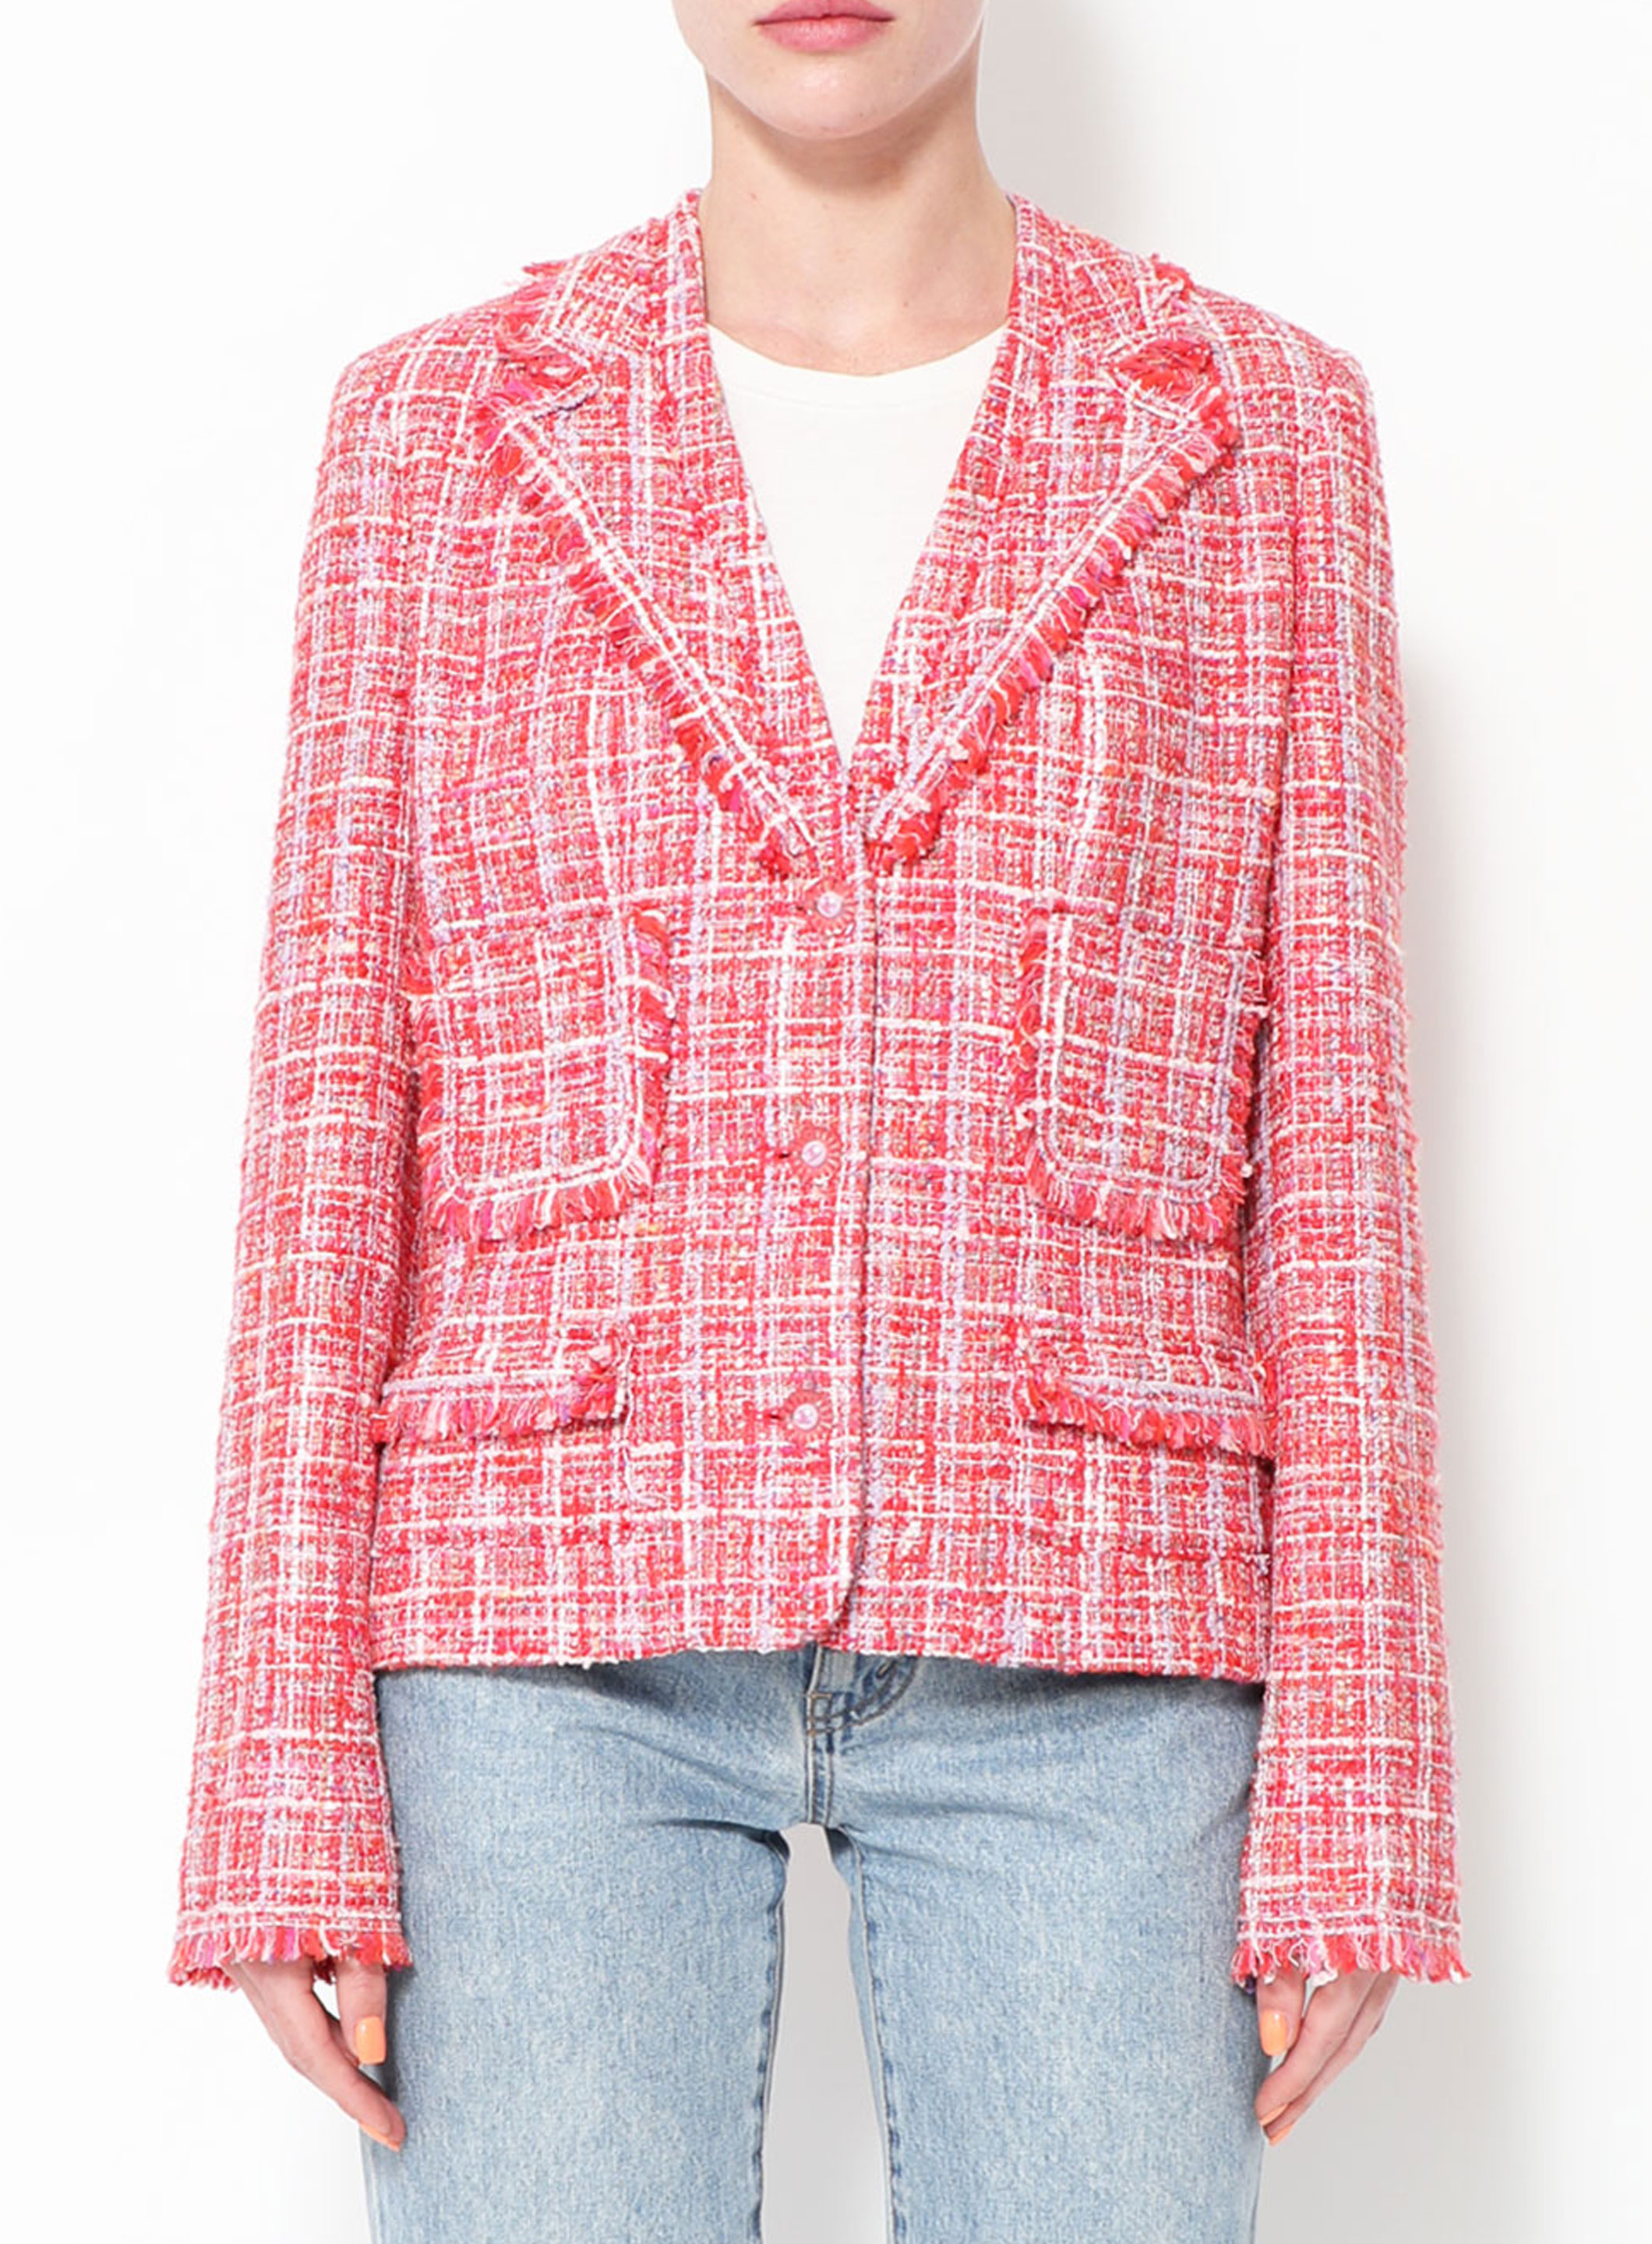 Chanel - Authenticated Jacket - Tweed Pink for Women, Very Good Condition